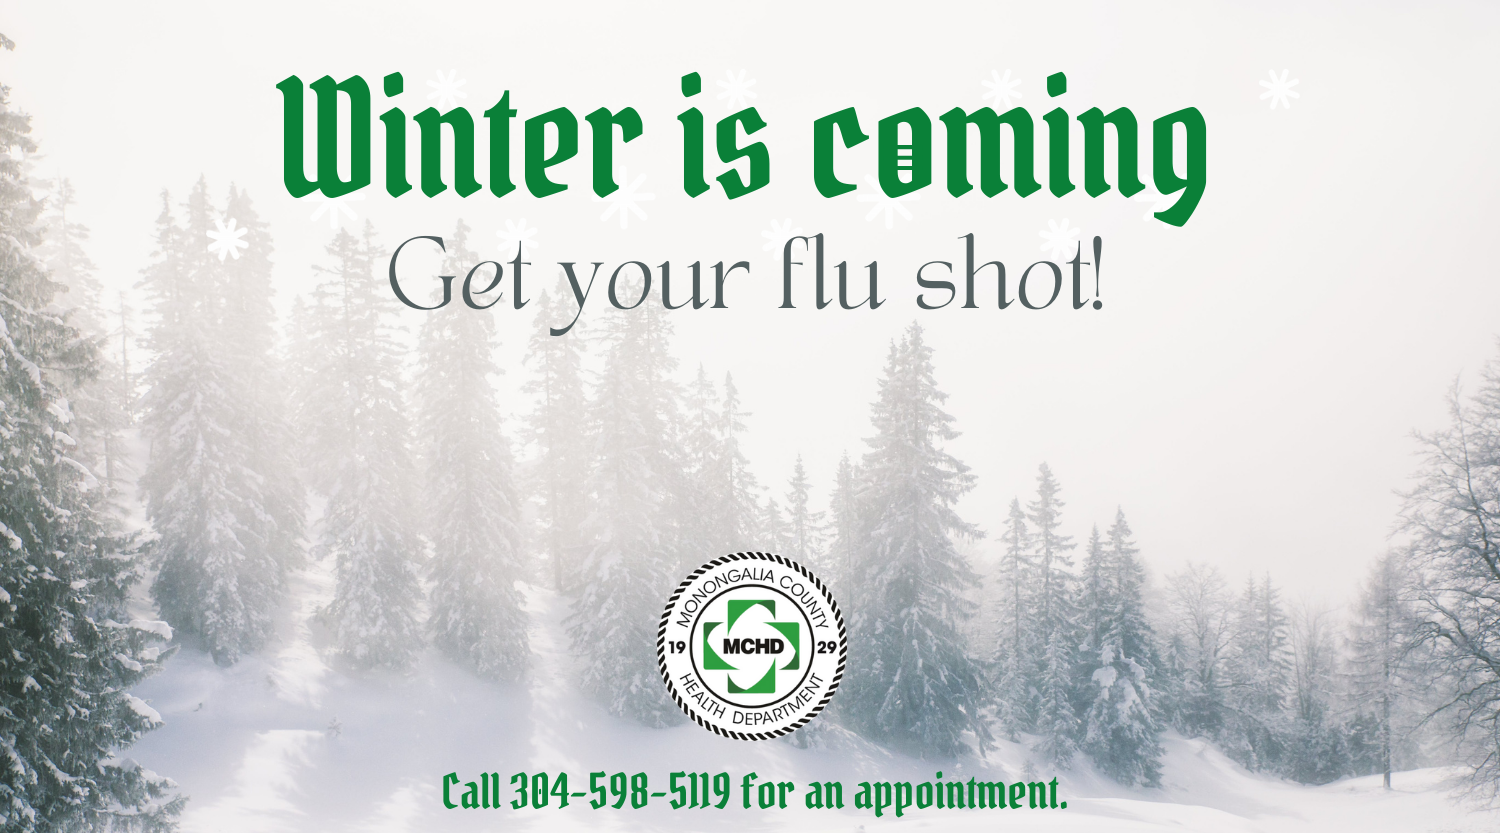 Want to stay active this winter? A flu shot can help!